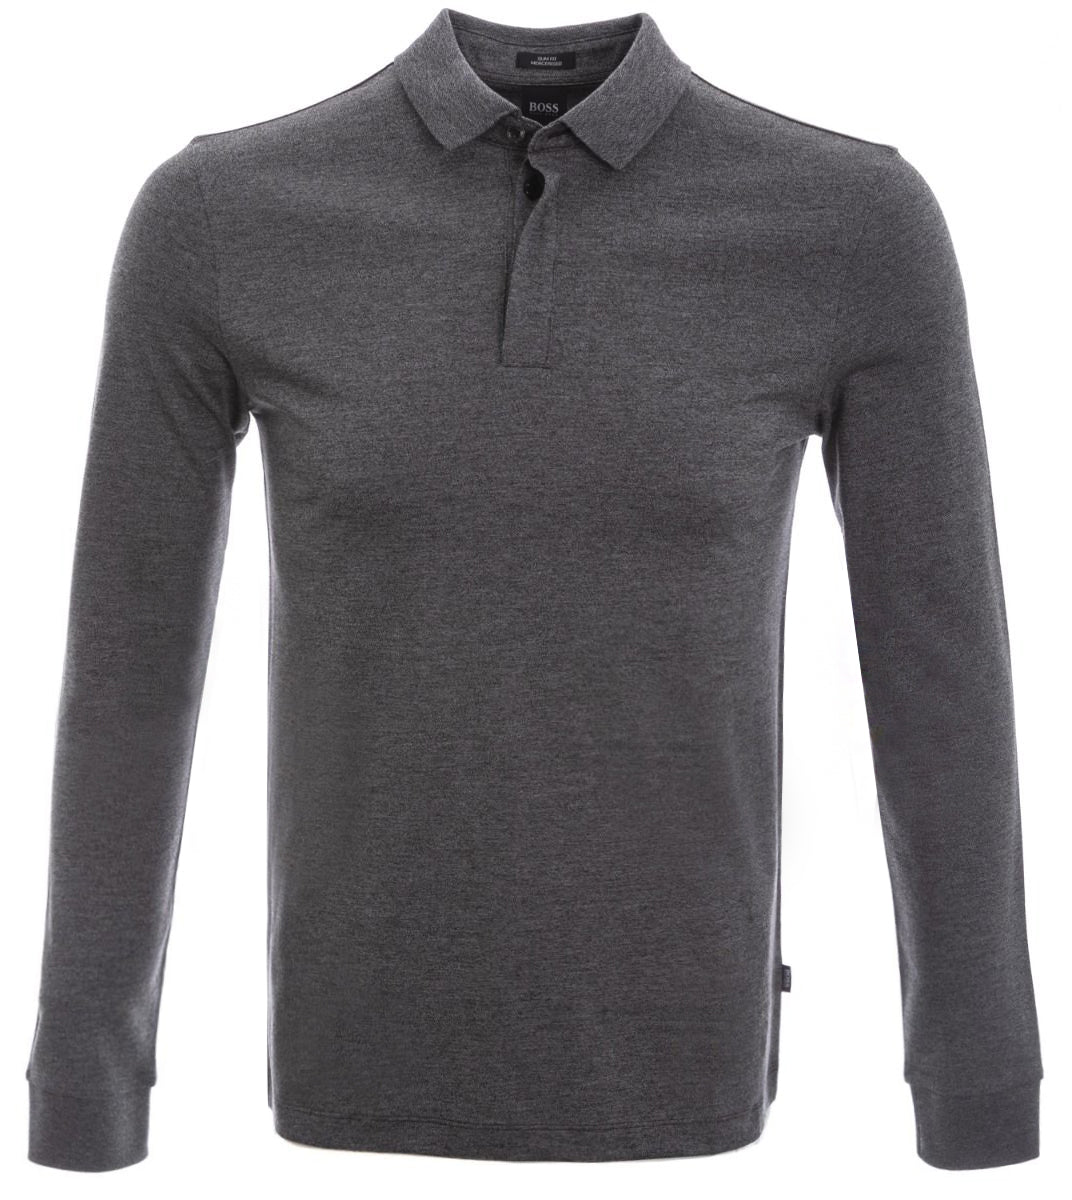 BOSS Pleins 15 Long Sleeve Polo Shirt in Black Front